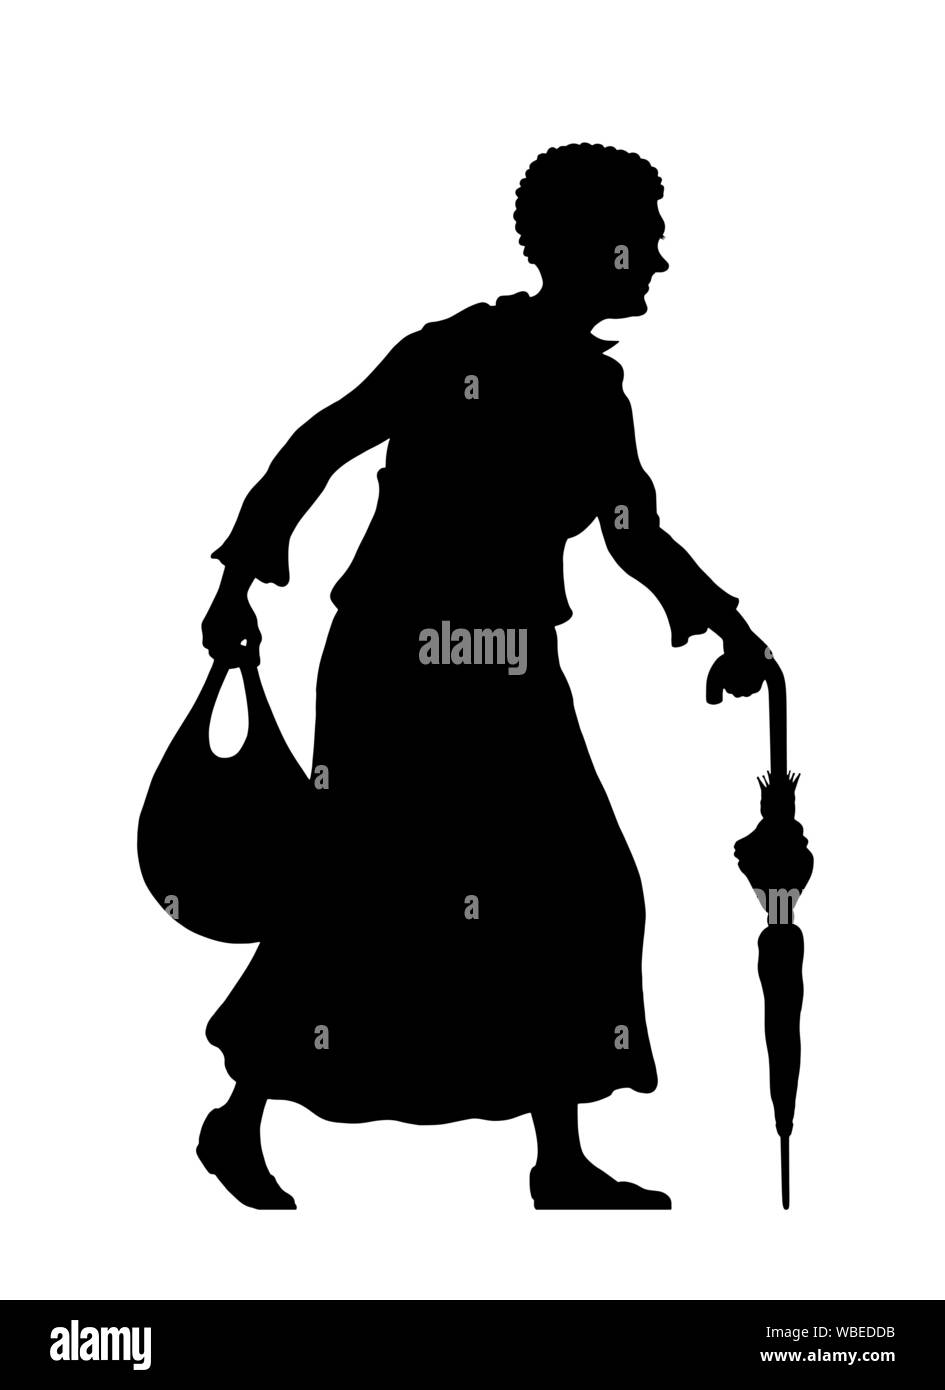 Refugee old woman silhouette with umbrella and bag. The silhouette objects and background are in different layers. Stock Vector